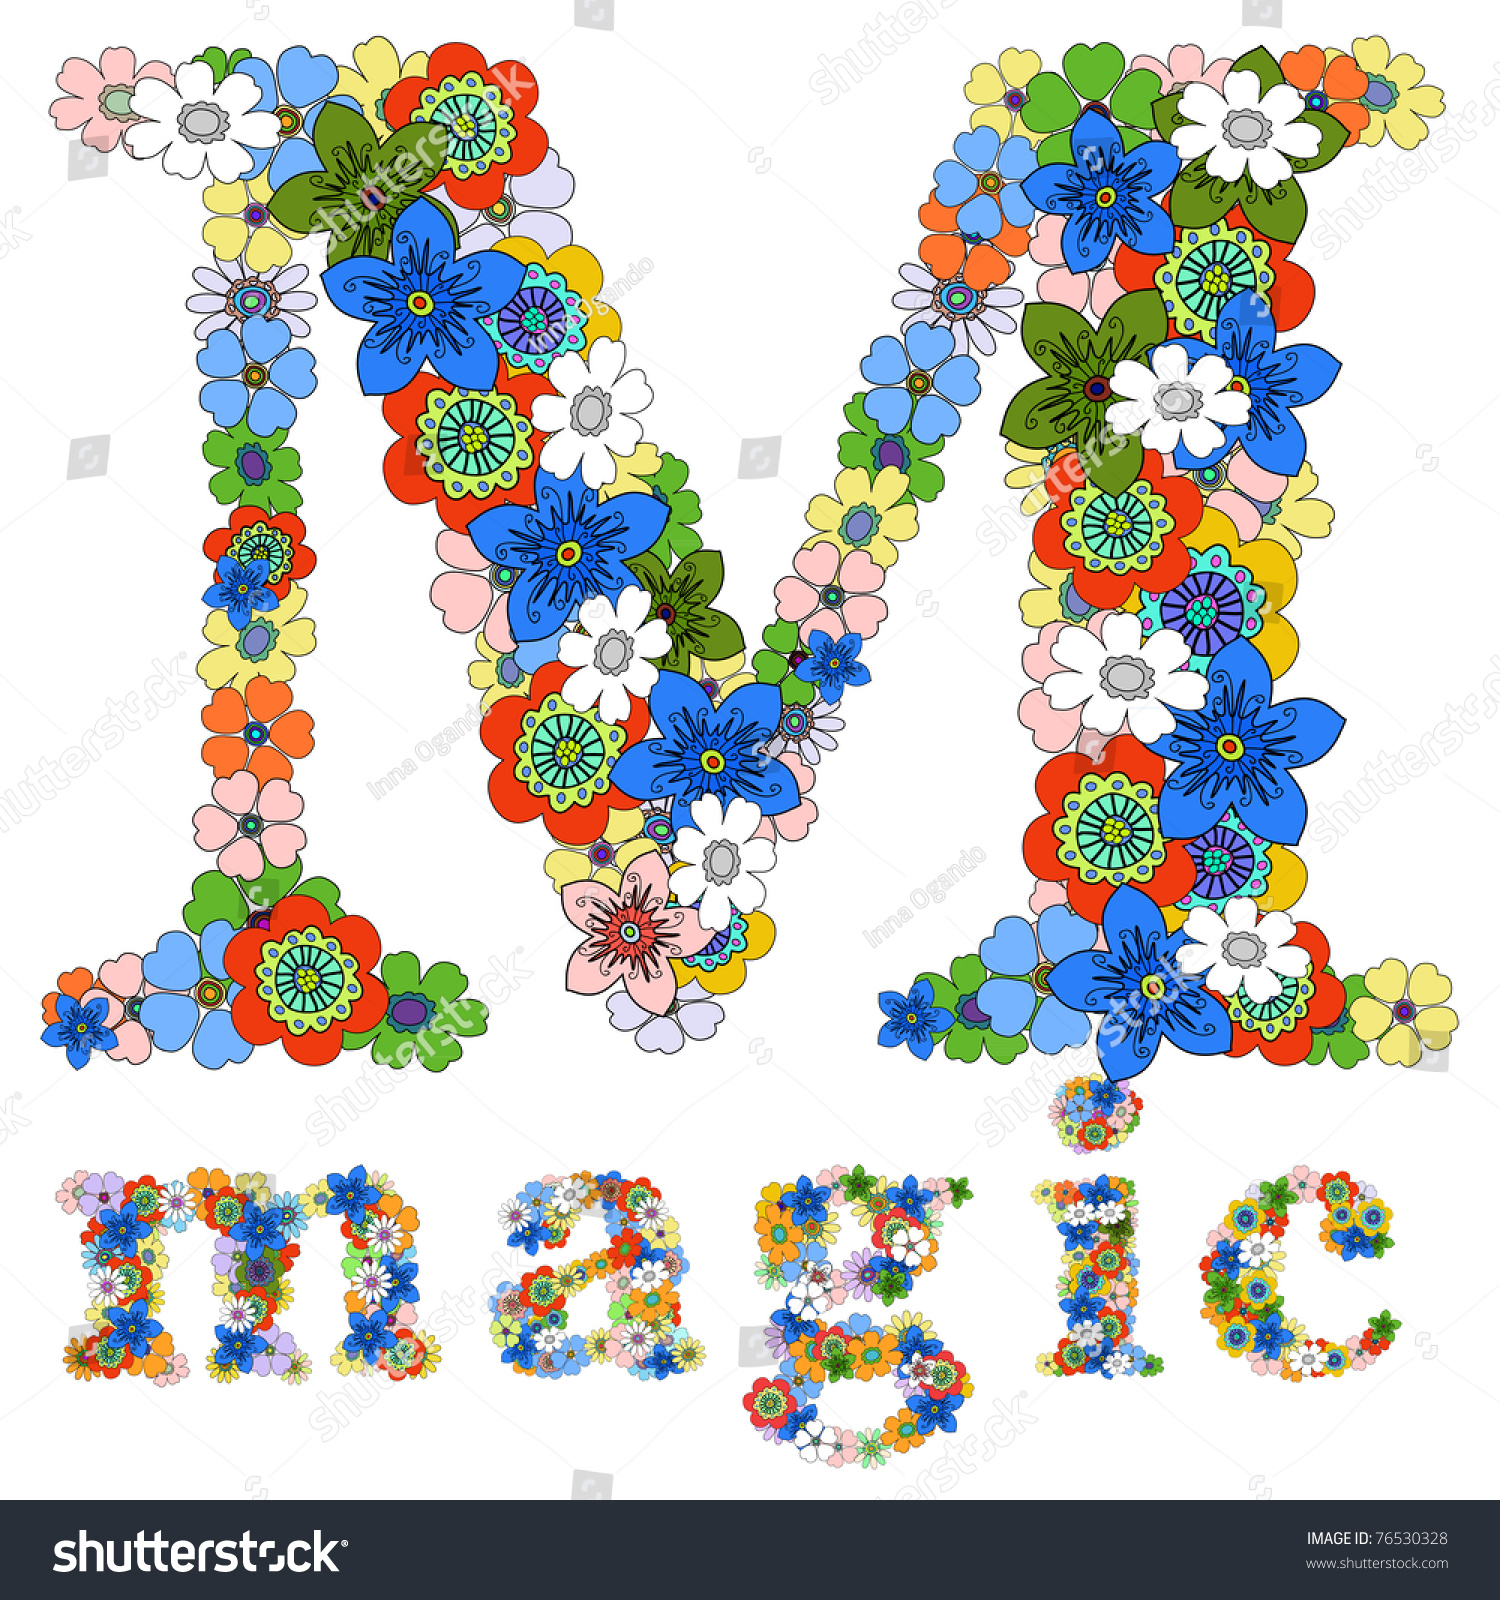 Letter M And Word Magic Floral; Vector. - 76530328 : Shutterstock